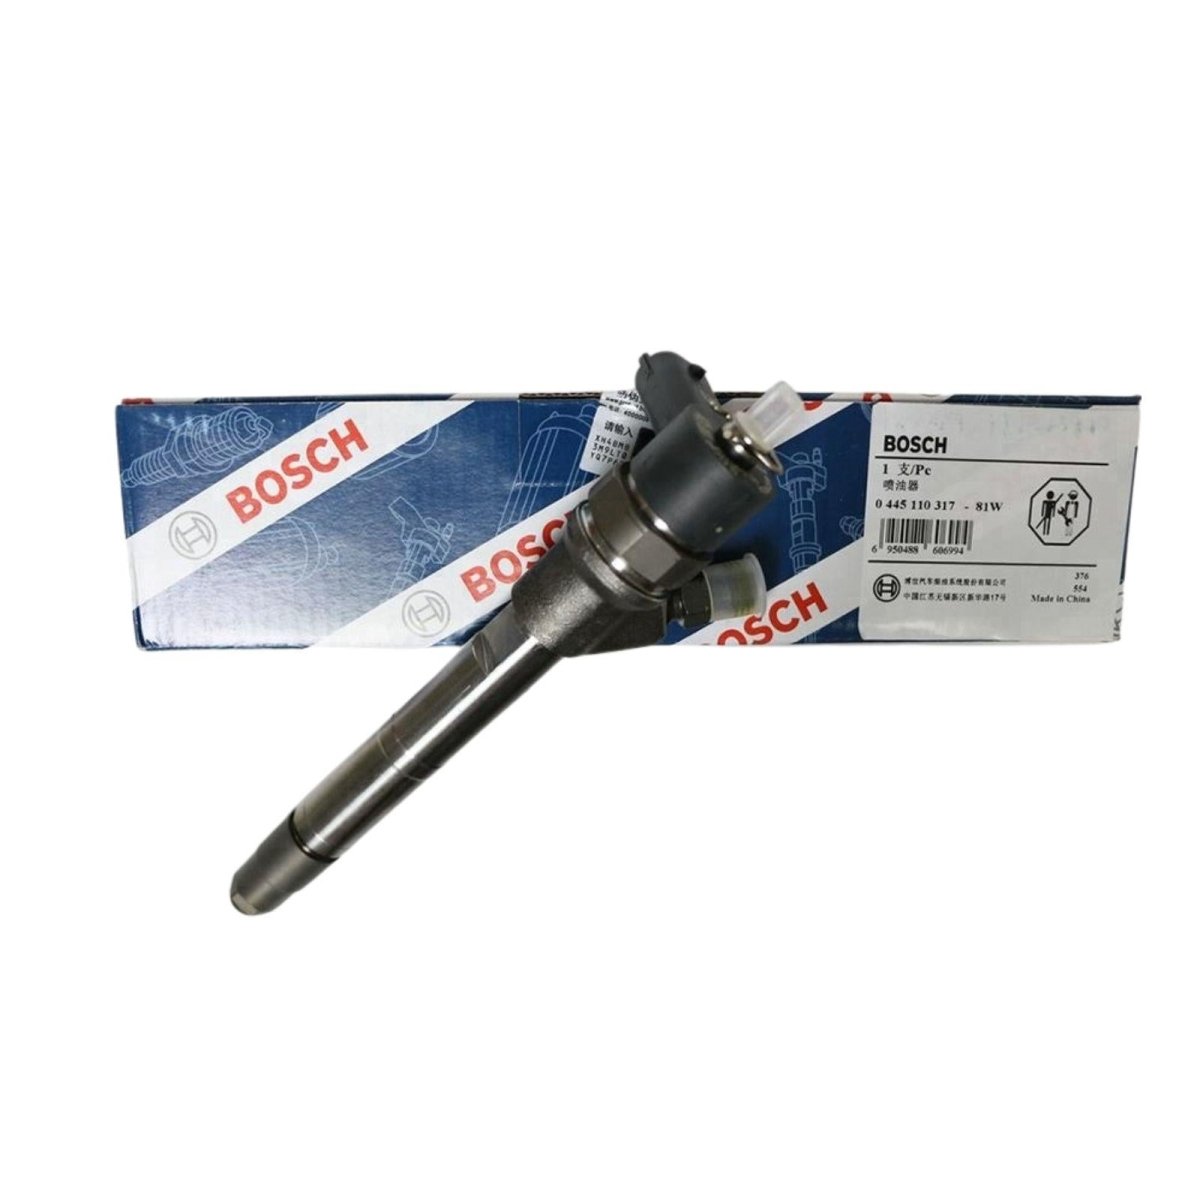 Inyector ZNA DONGFENG = 110482 -0986435301 - COMERCIAL CPR SPA - BOSCH - 0445110317